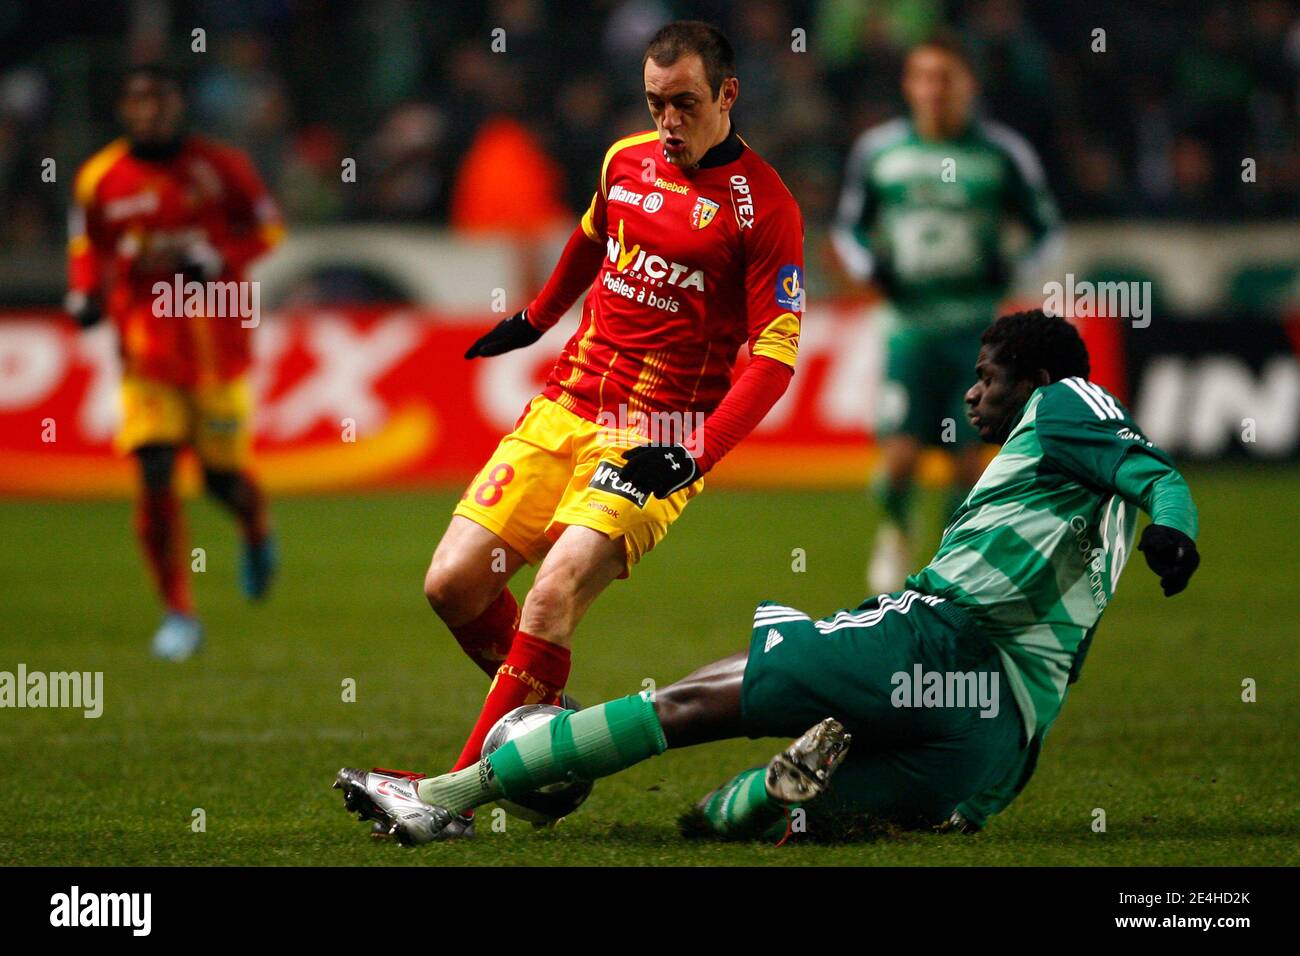 Lens' Sebastien Roudet fights for the ball with St-Etienne's Guirane N'Daw  during the French First League Soccer match, RC Lens vs AS Saint-Etienne at  Felix Bollaert Stadium in Lens, north of France